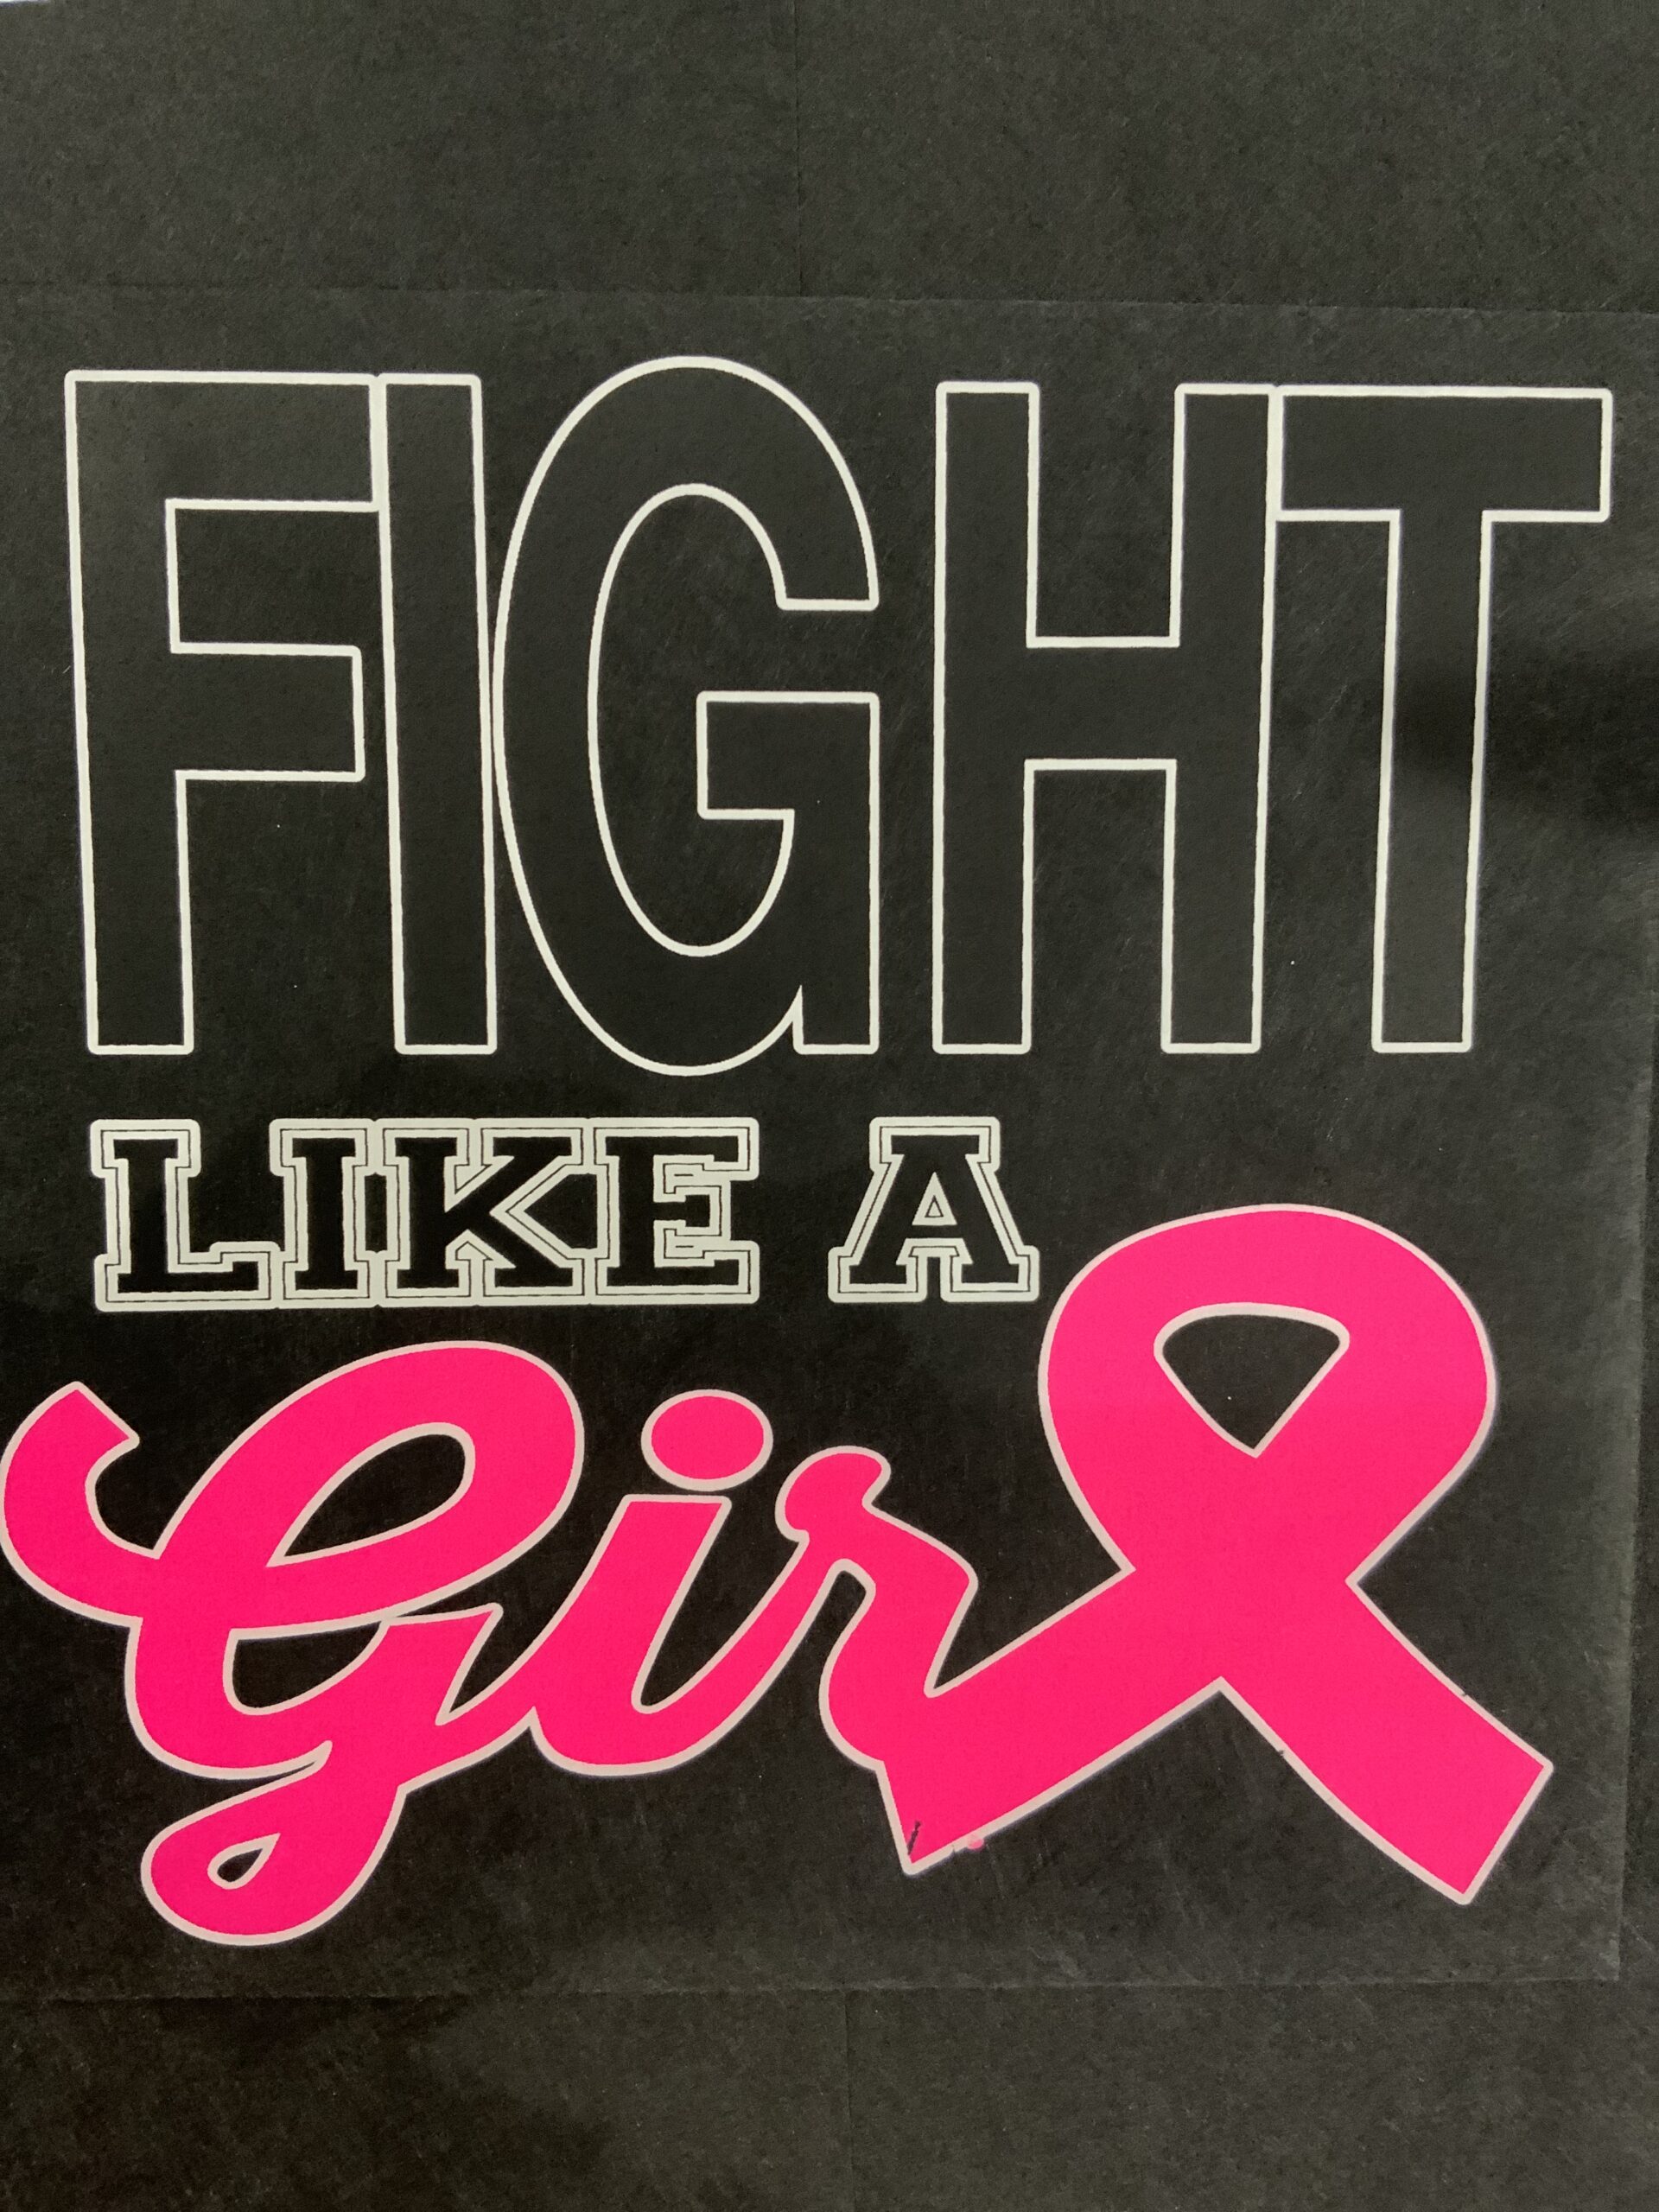 Cancer (Fight like a girl)